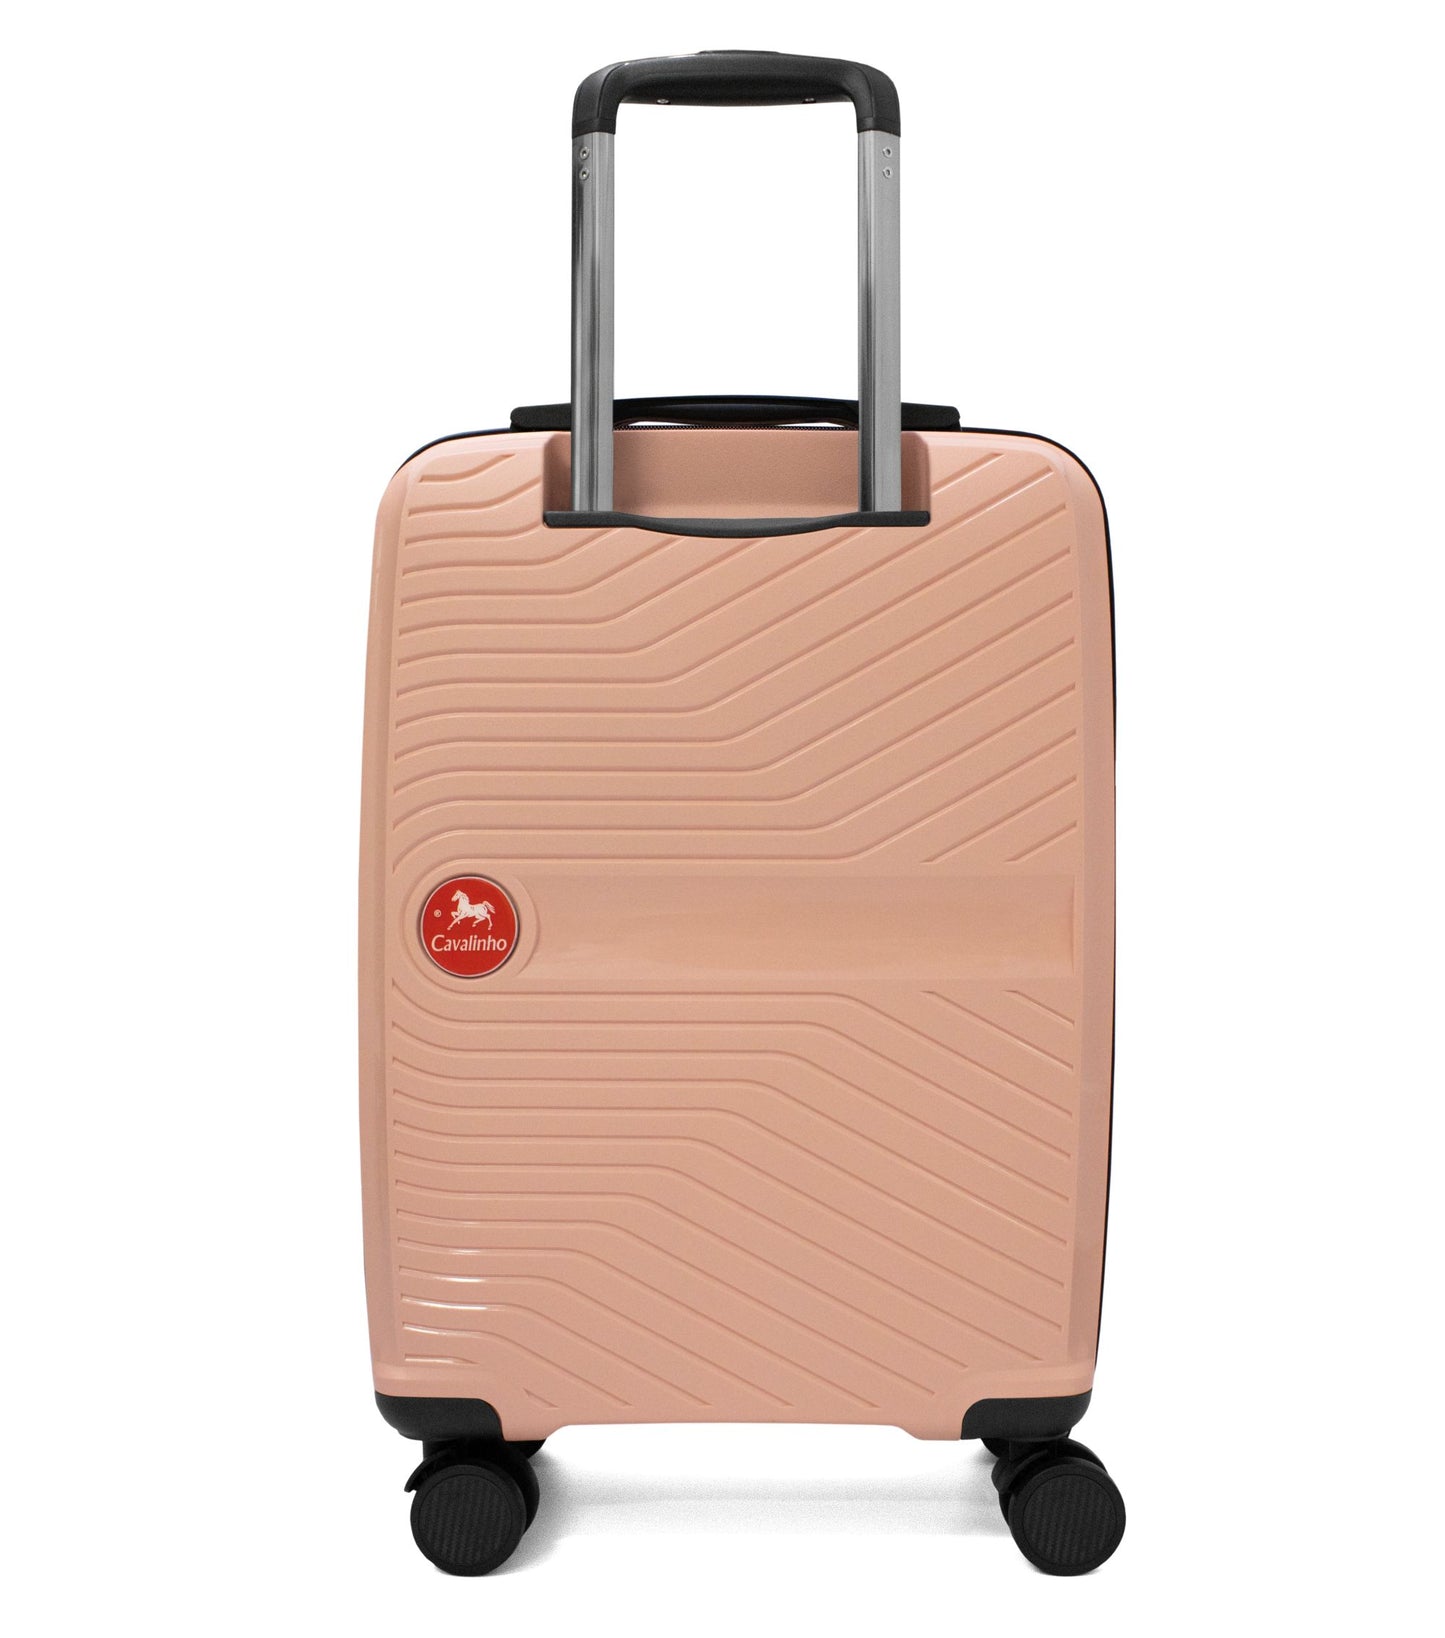 #color_ 19 inch Salmon | Cavalinho Colorful Carry-on Hardside Luggage (19") - 19 inch Salmon - 68020004.11.19_3